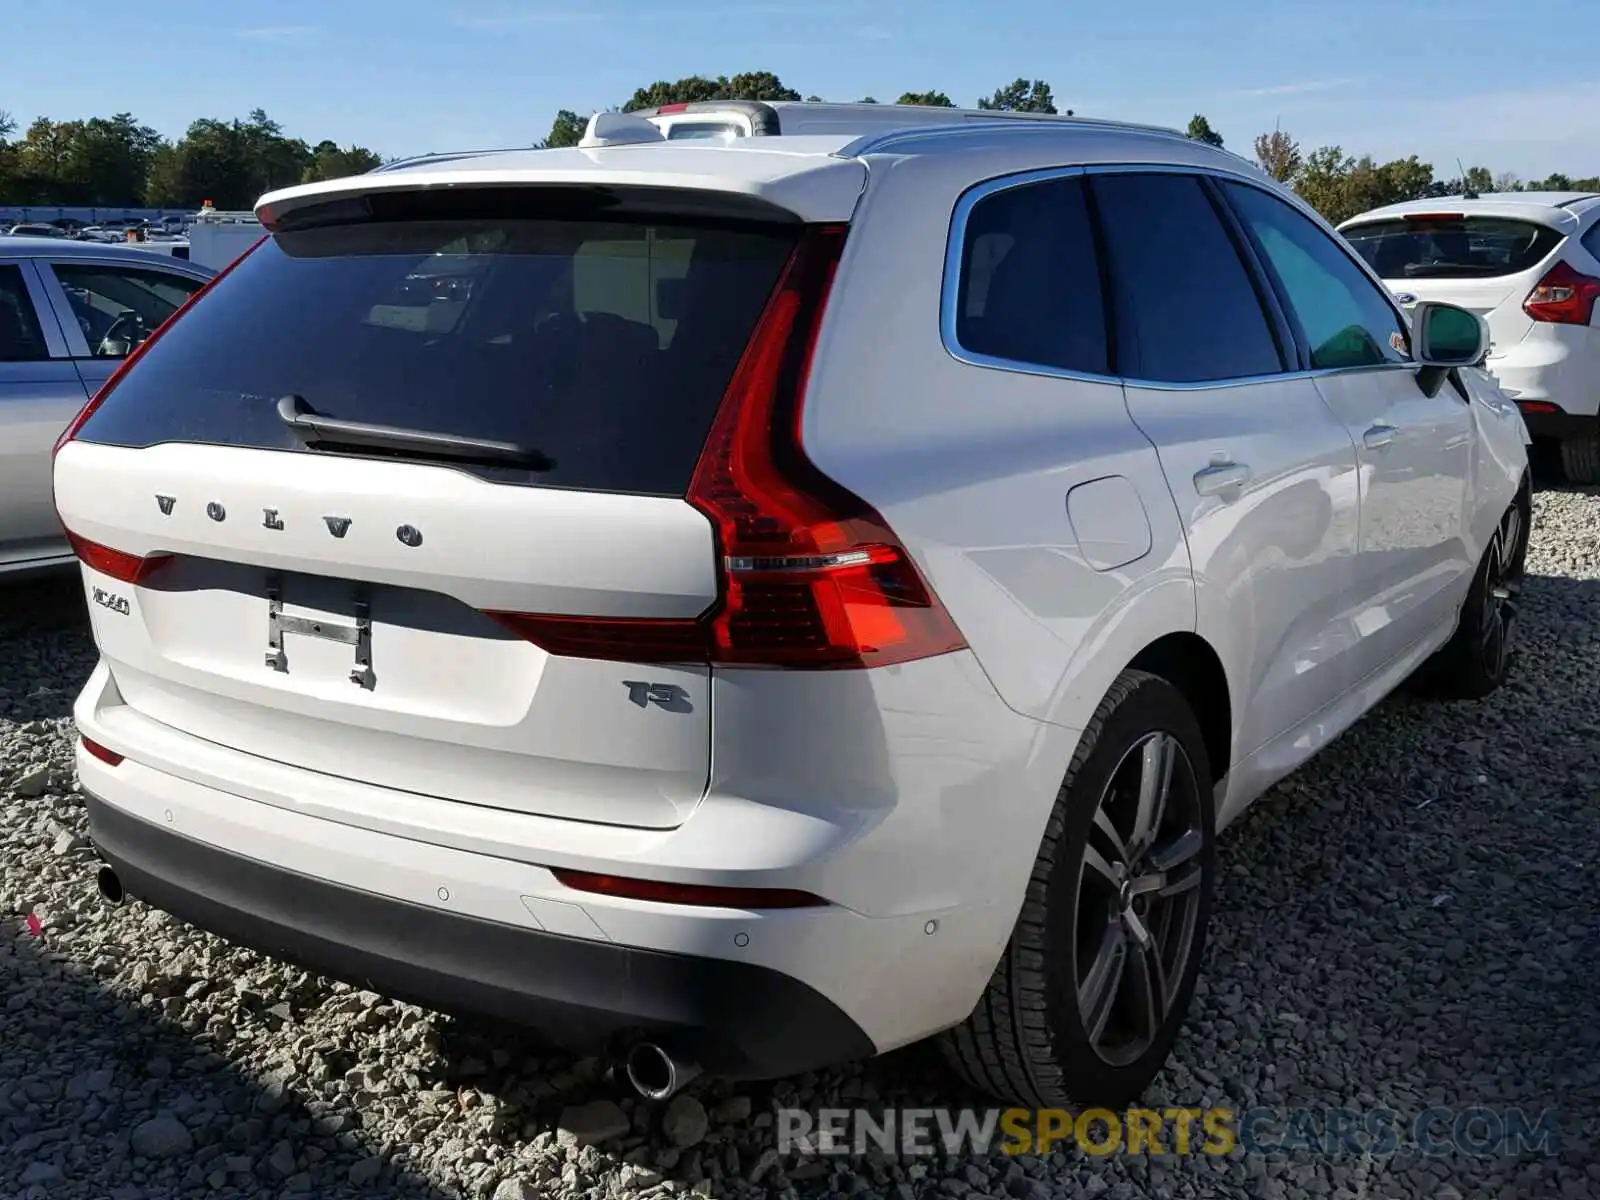 4 Photograph of a damaged car LYV102DKXKB176698 VOLVO XC60 T5 2019